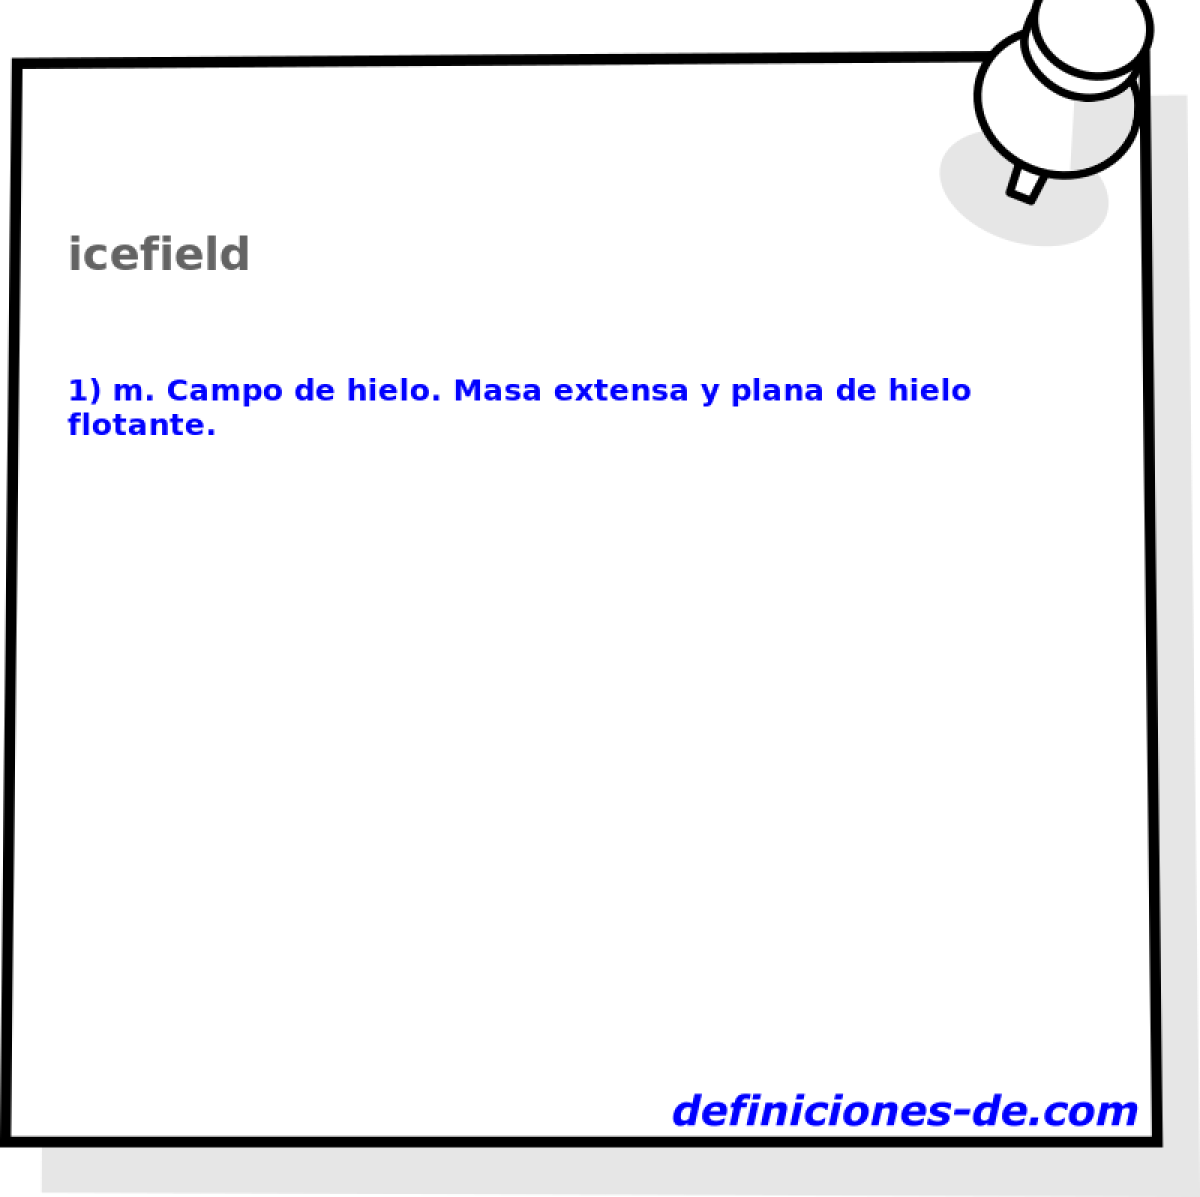 icefield 